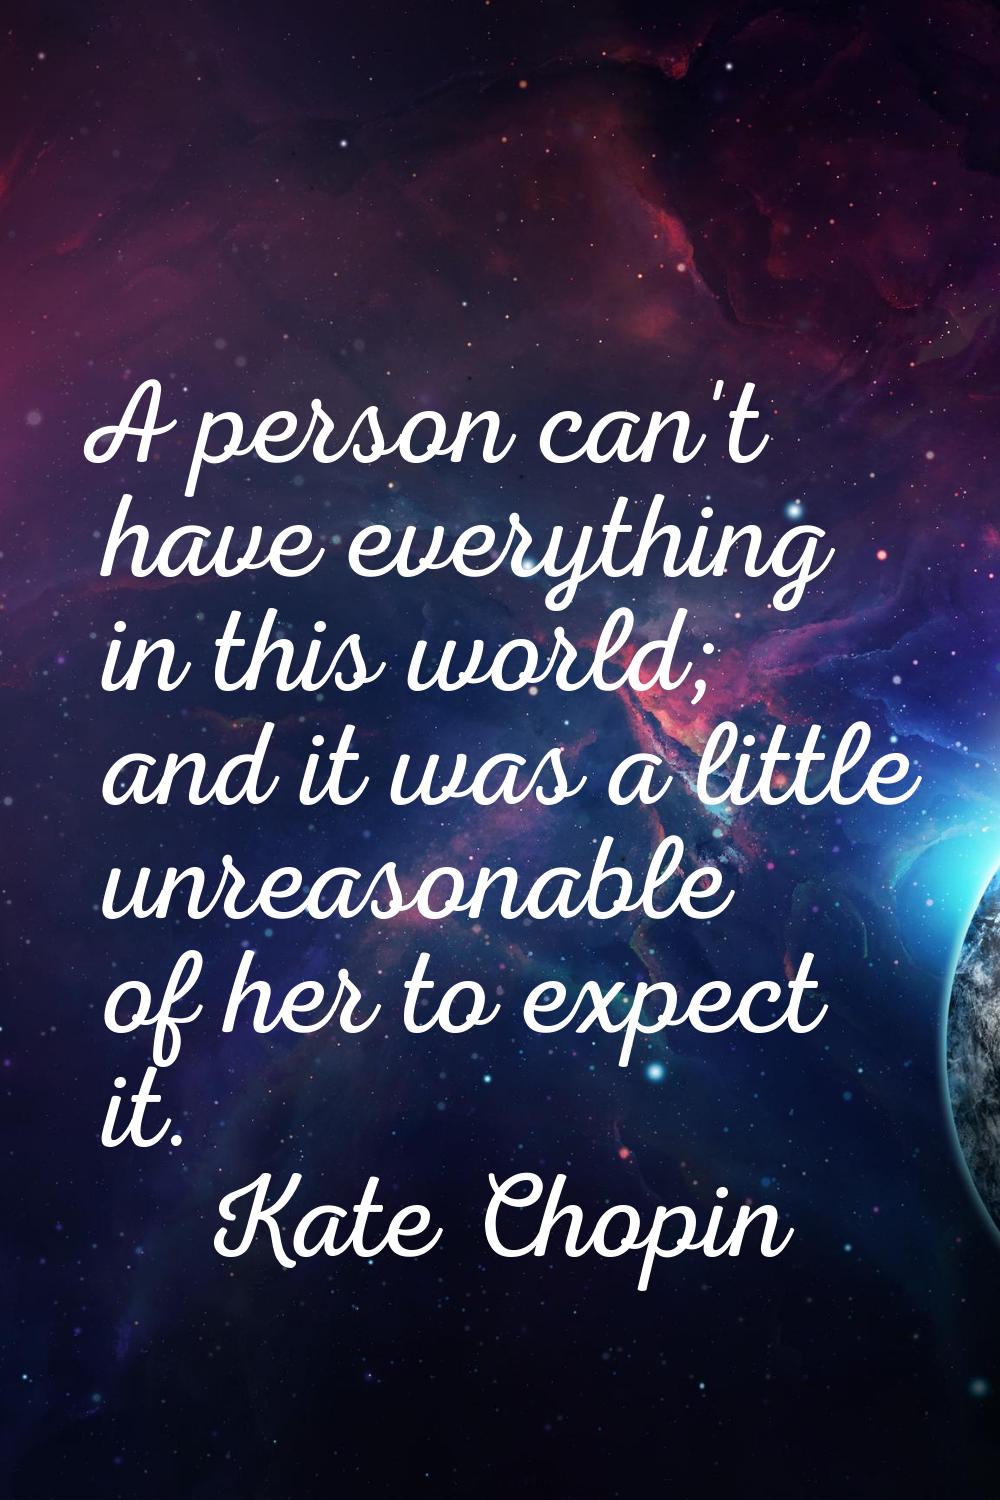 A person can't have everything in this world; and it was a little unreasonable of her to expect it.